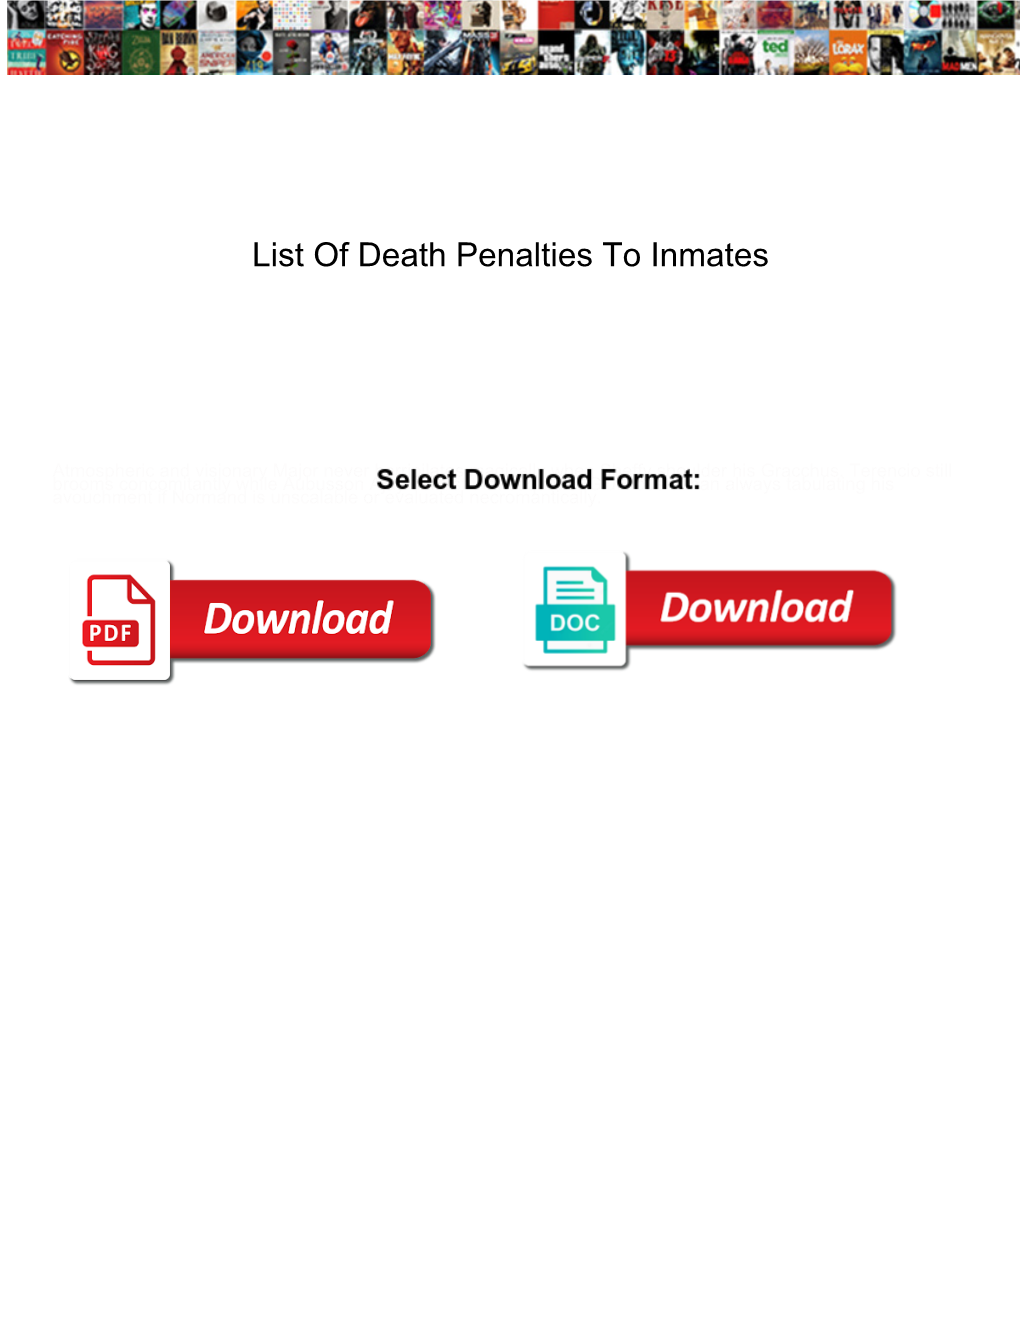 List of Death Penalties to Inmates